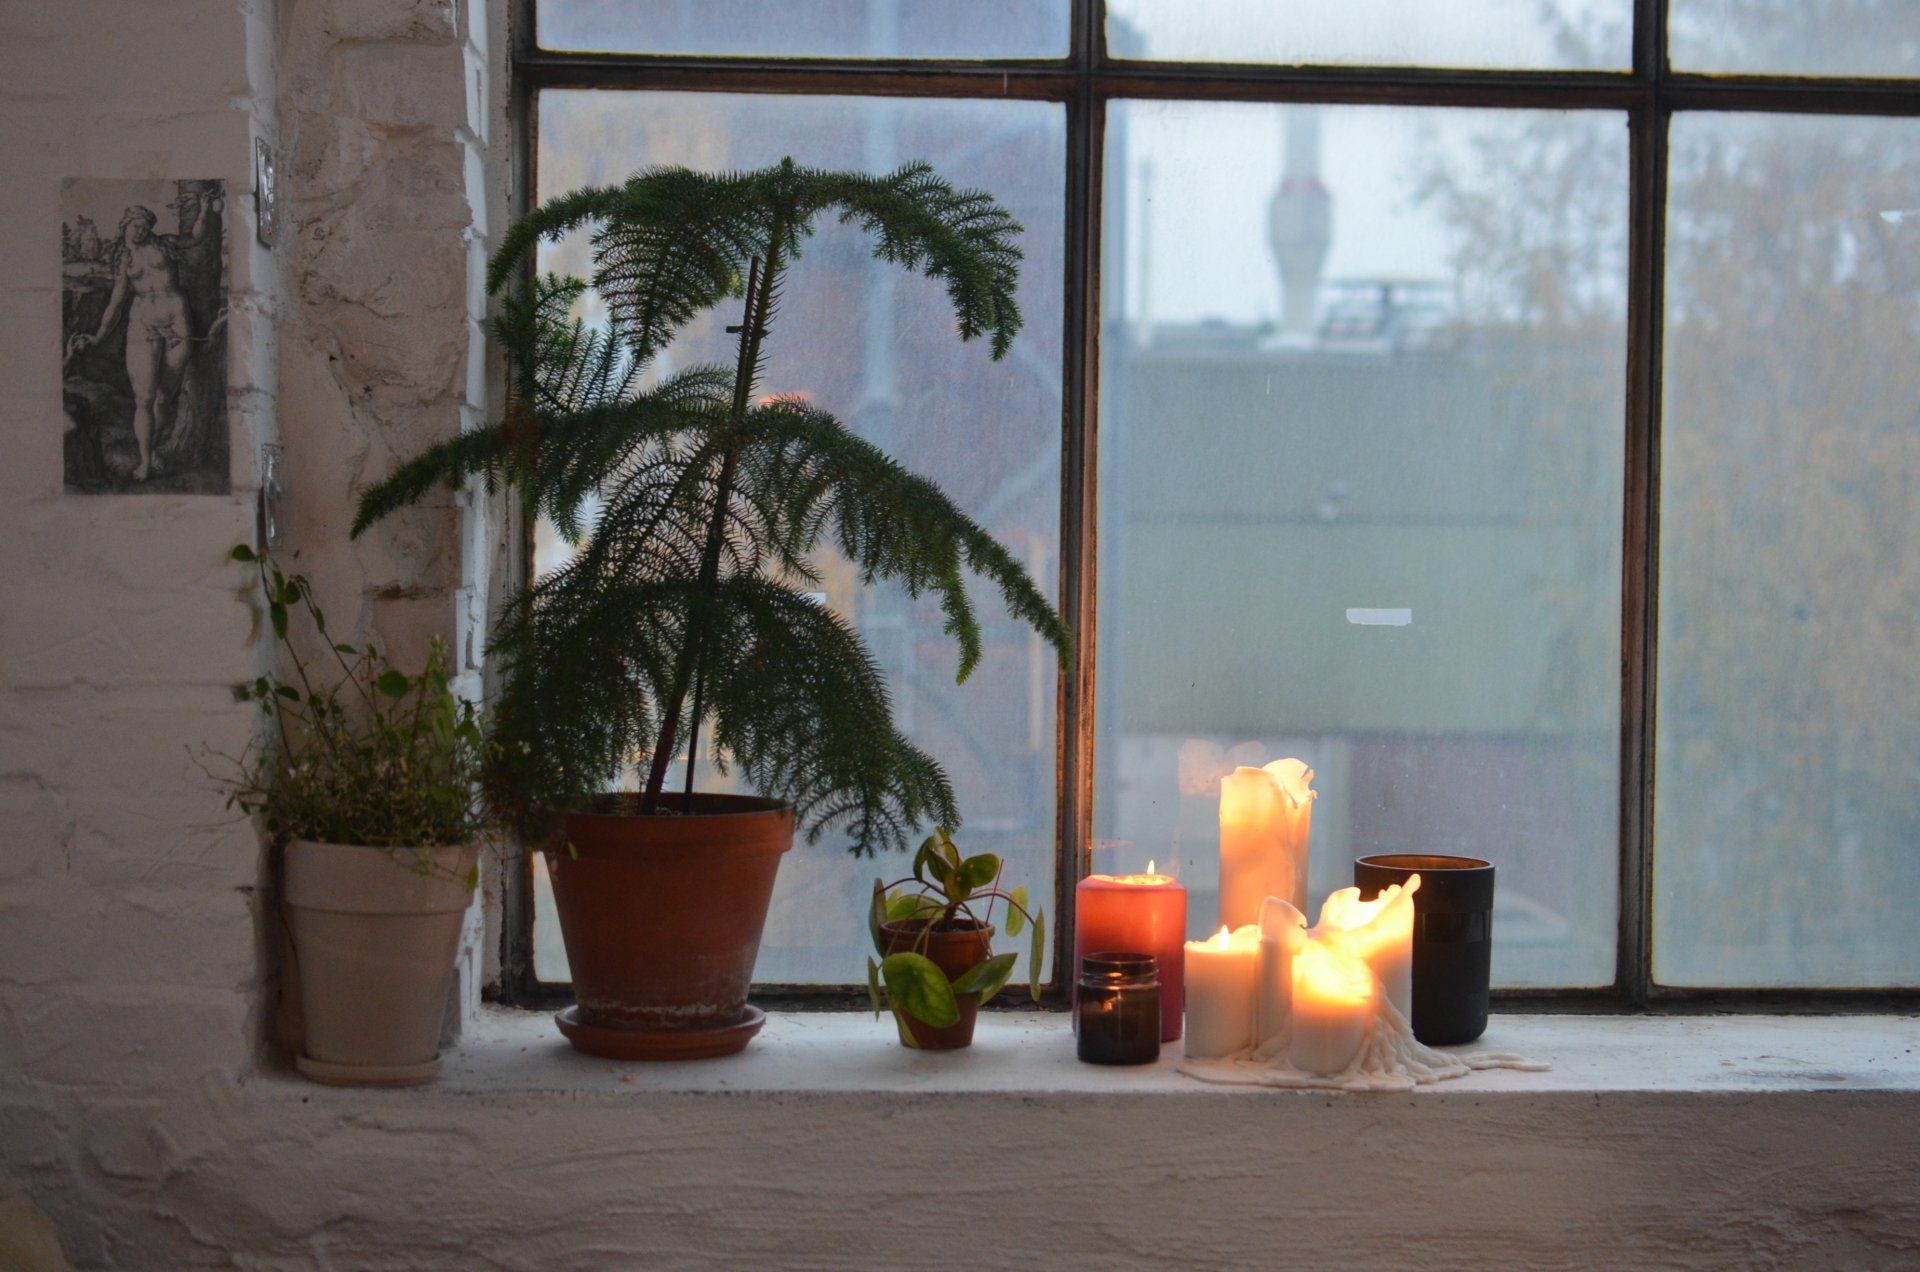 A window sill with potted plants and candles on it.